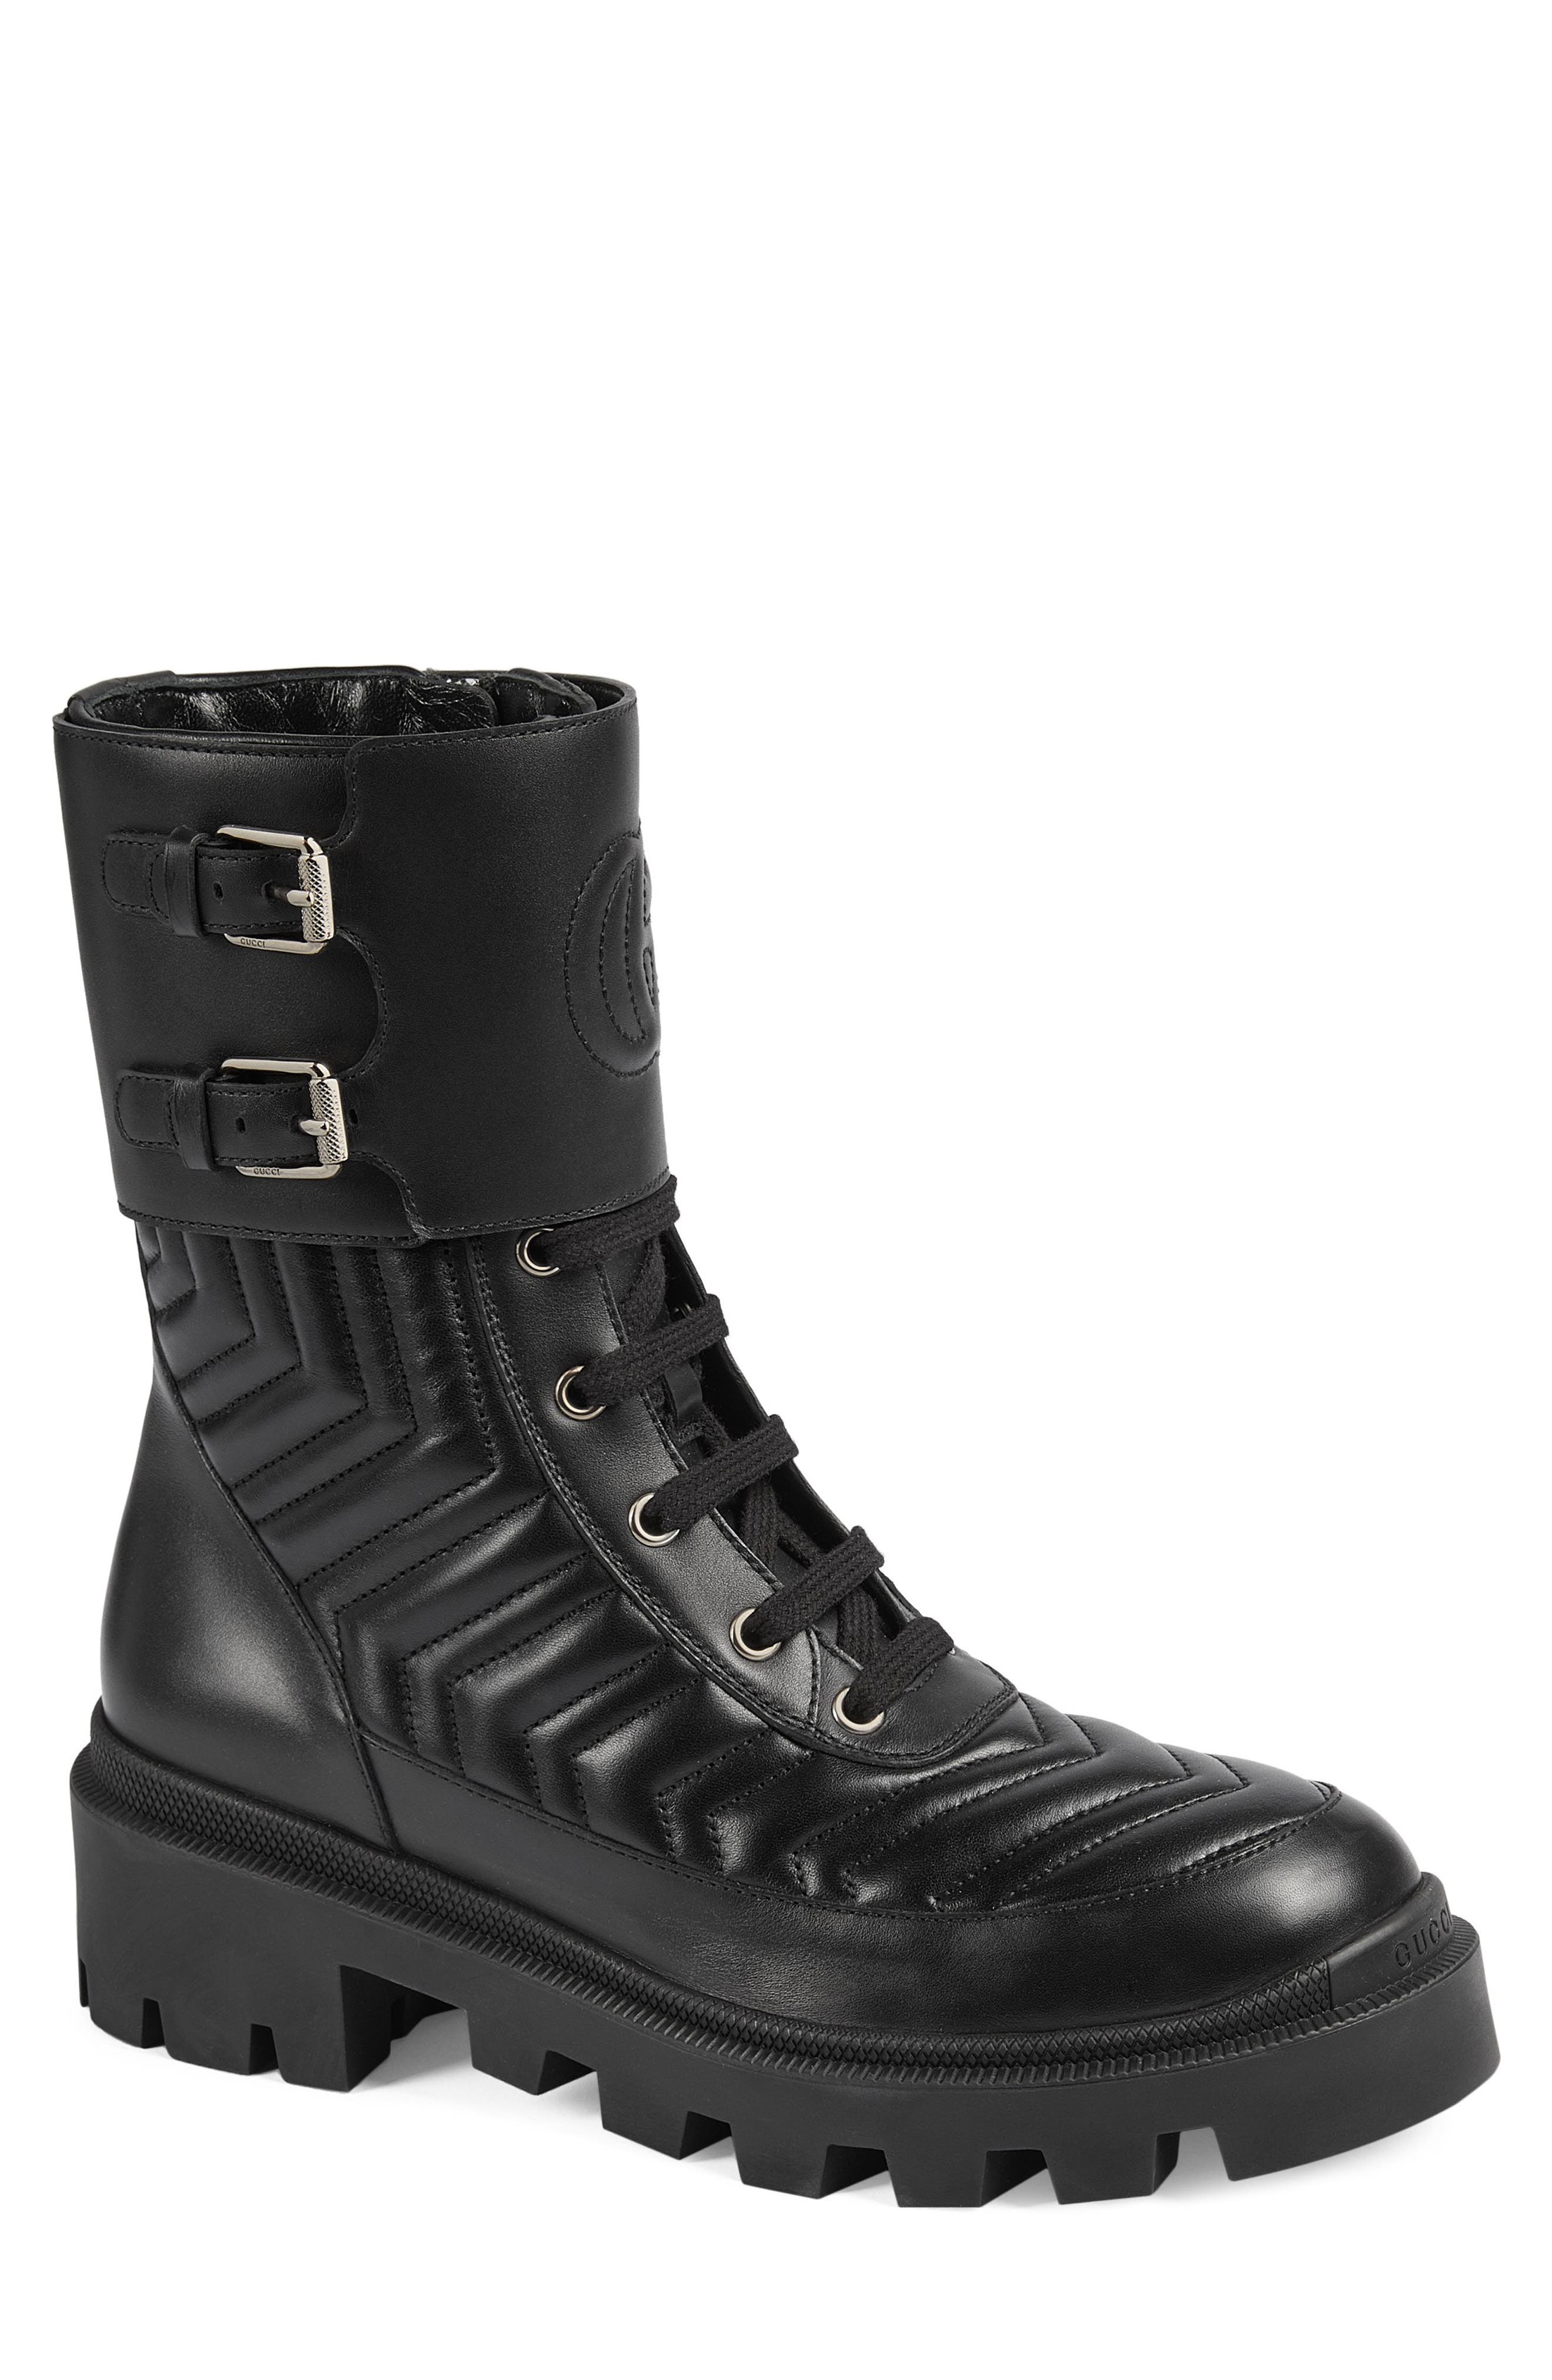 gucci women's boots nordstrom